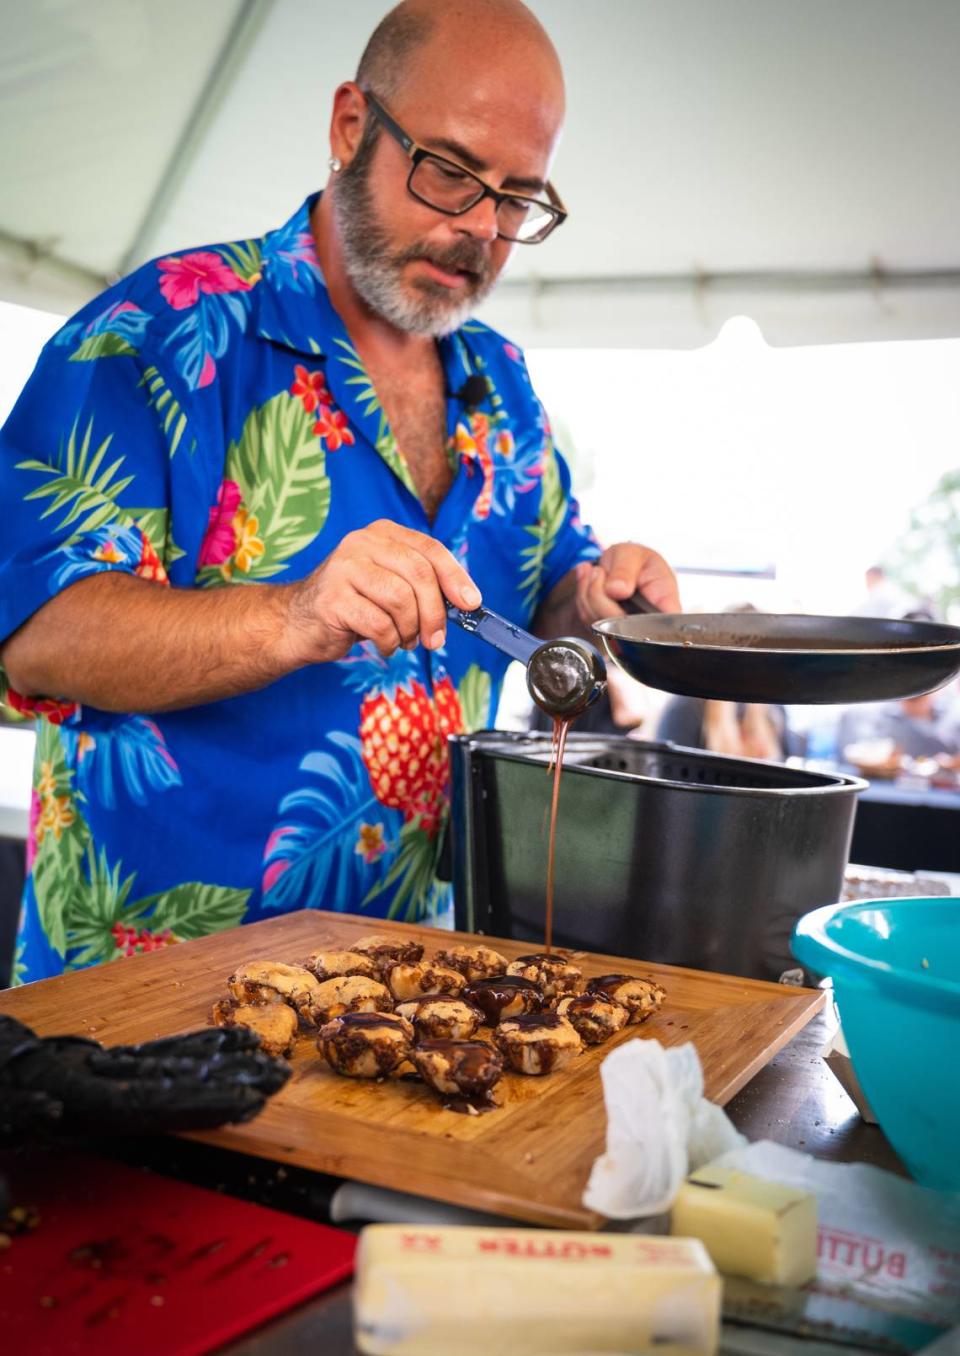 Food Network star and Kentucky native ason “Lord Honey” Smith will return to the CRAVE Kitchen Stage with a cooking demo.